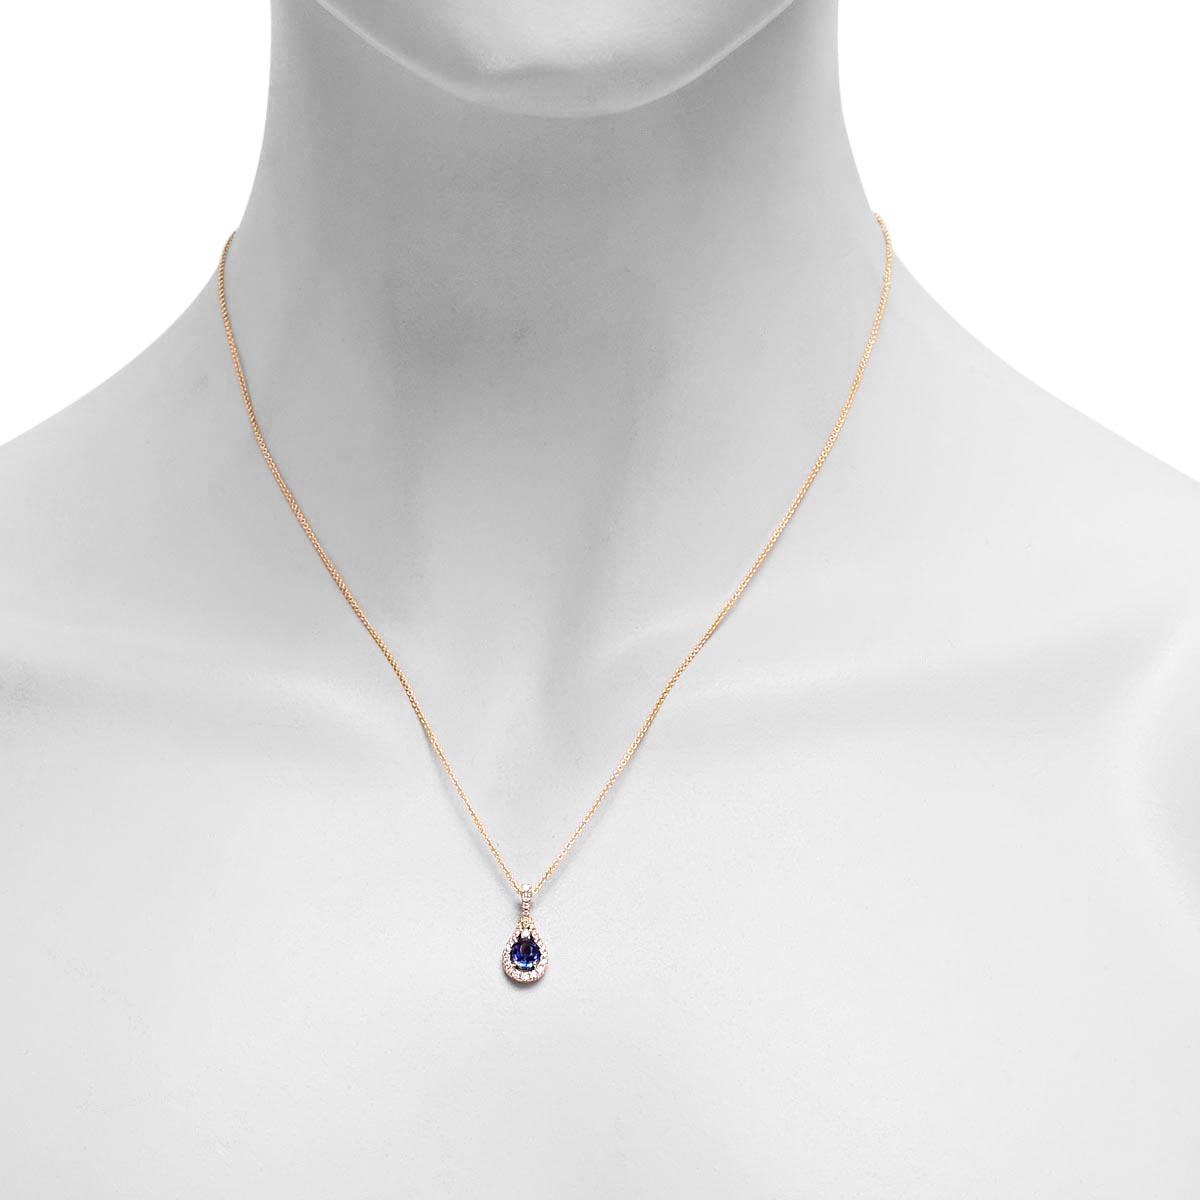 Oval Sapphire Necklace in 14kt Yellow Gold with Diamonds (1/5ct tw)